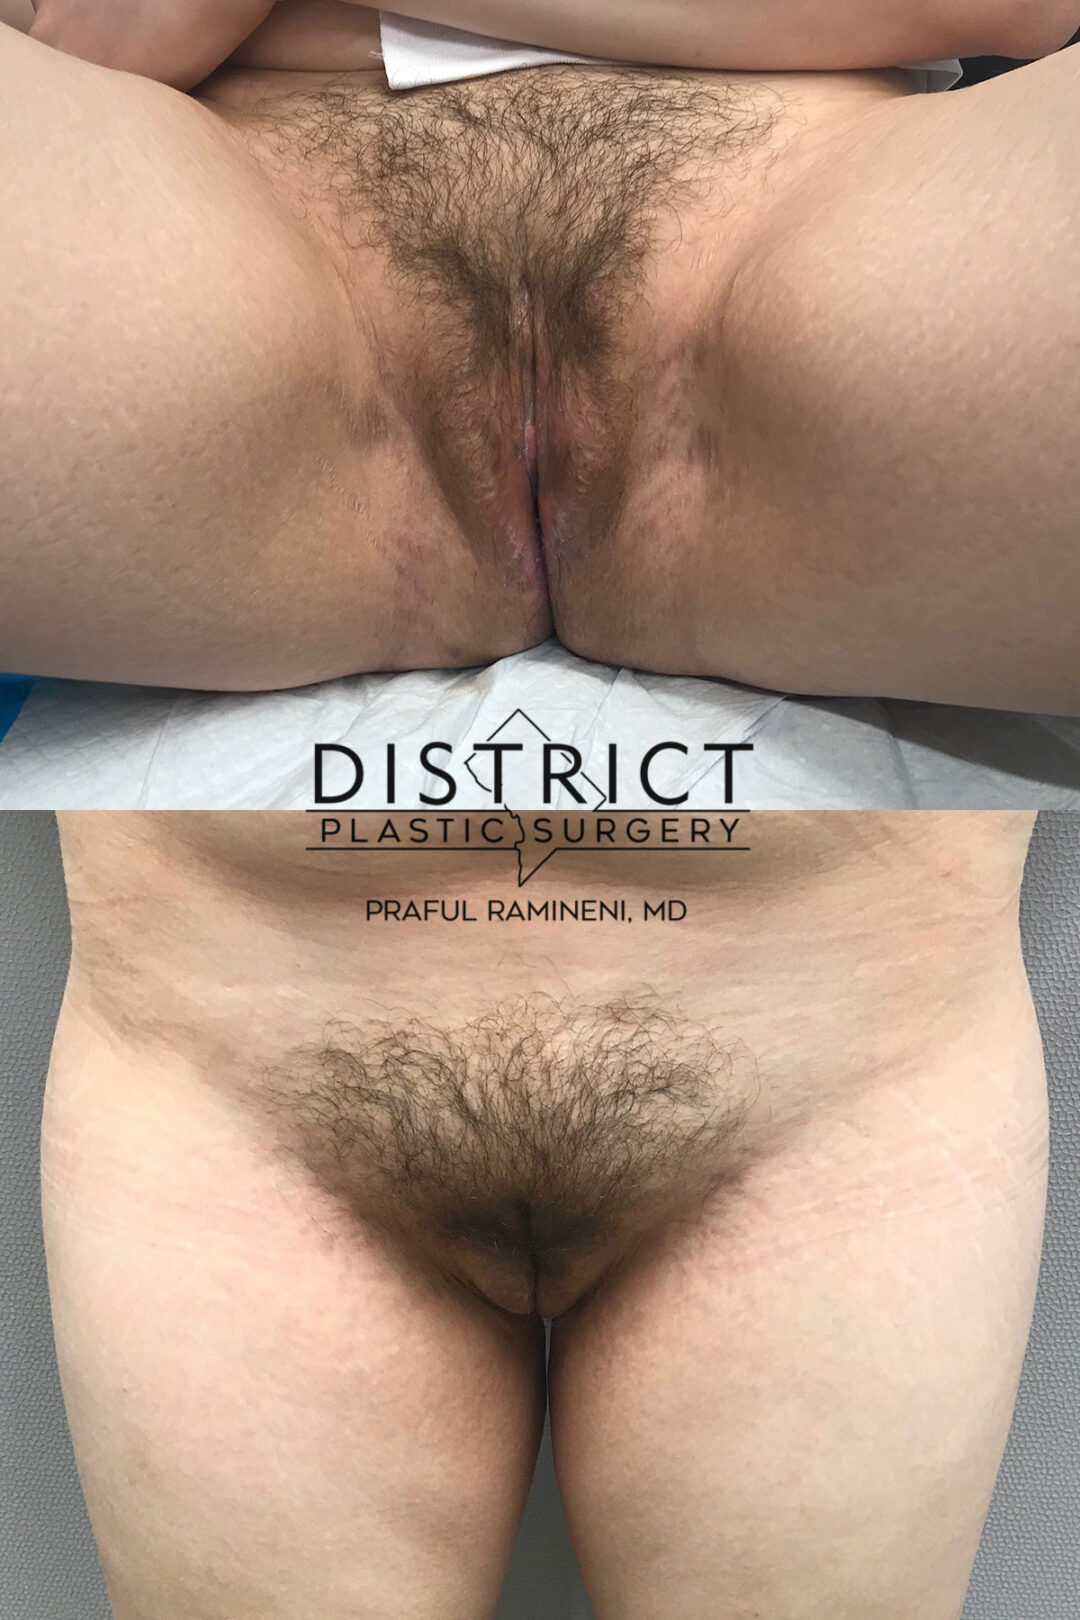 Vaginoplasty Before and After Photo by District Plastic Surgery in Washington, DC.jpeg.jpeg